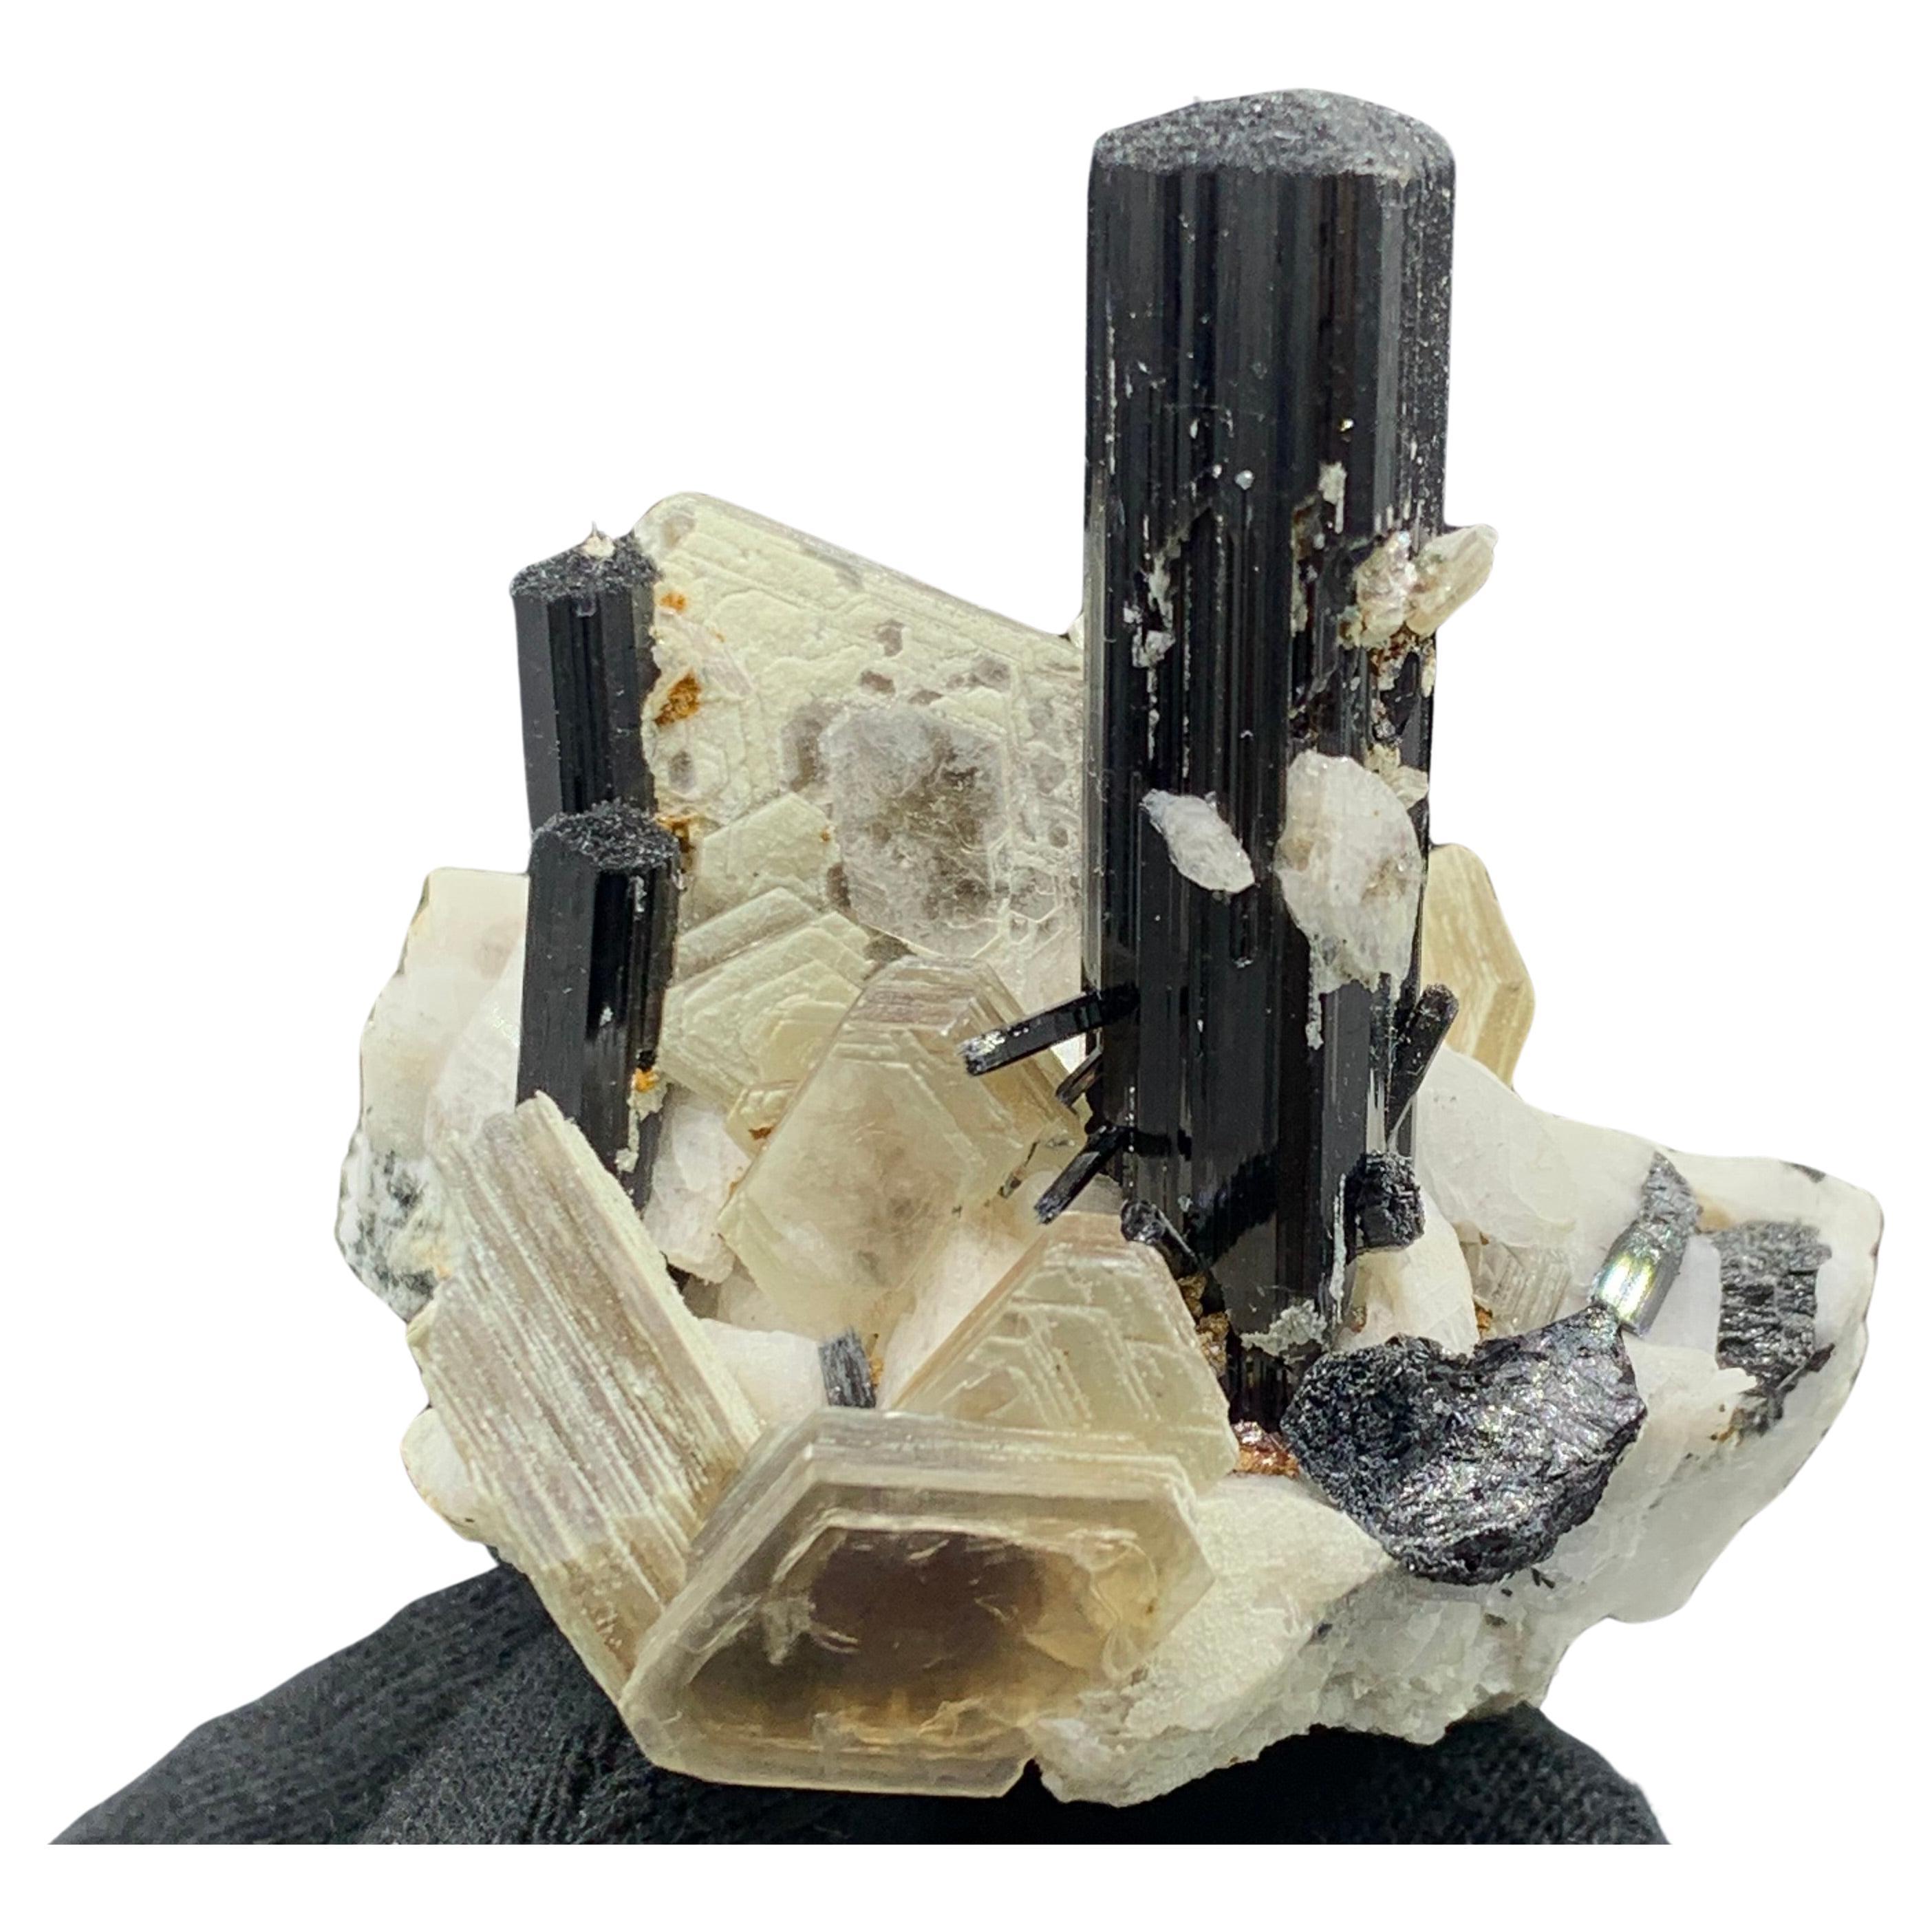 102.07 Gram Black Tourmaline Specimen Attached With Muscovite From Pakistan 

Weight: 102.07 Gram 
Dimension: 5.9 x 6.1 x 5.1 Cm
Origin: Skardu, Pakistan 

Tourmaline is a crystalline silicate mineral group in which boron is compounded with elements